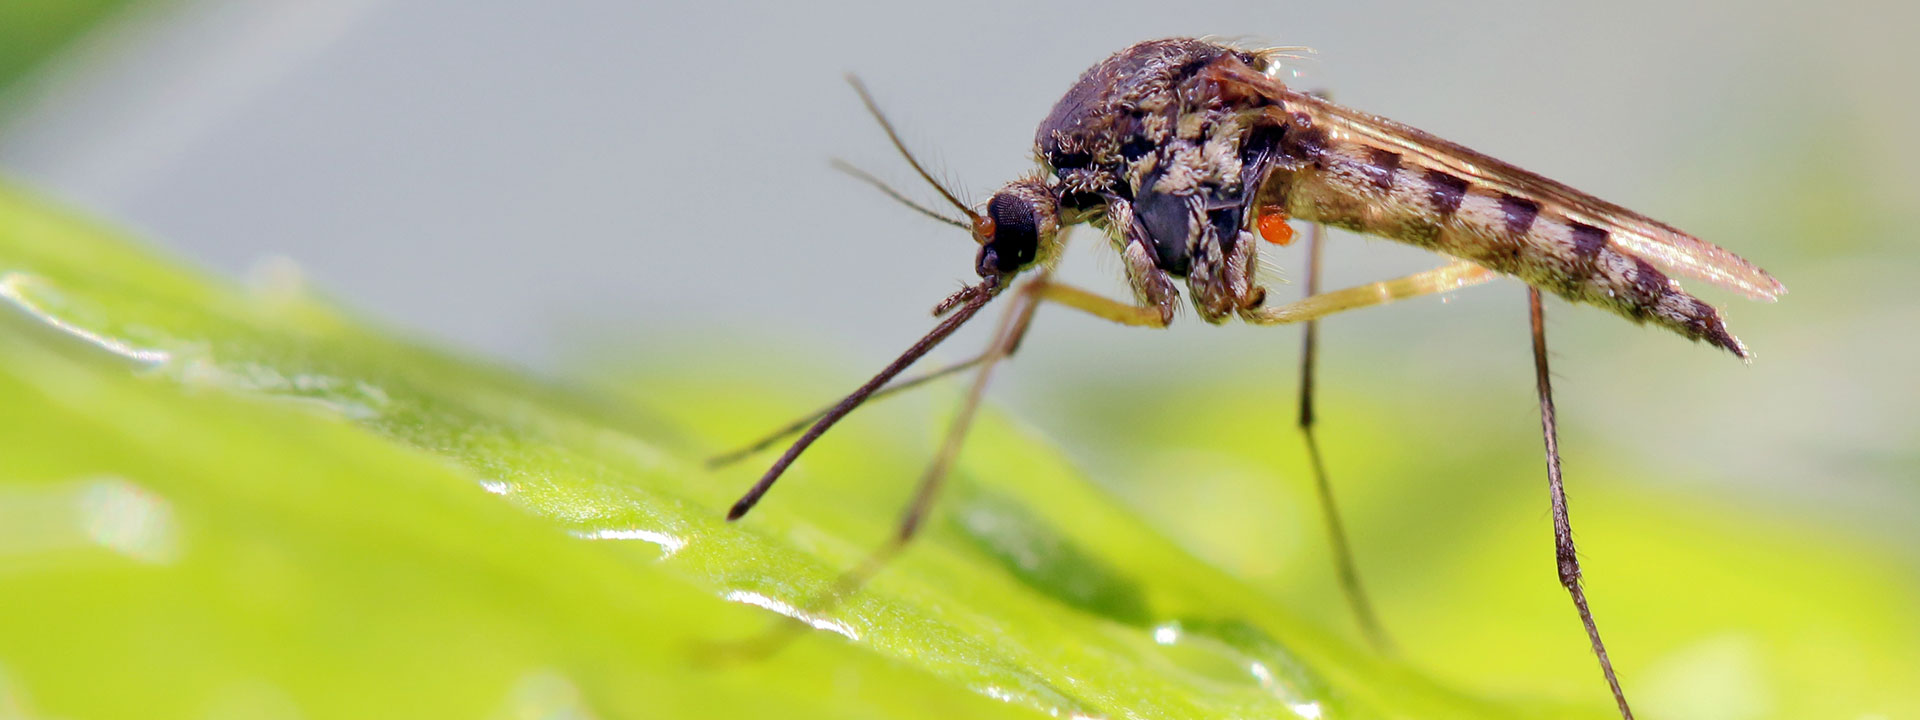 A mosquito sitting on a leaf.